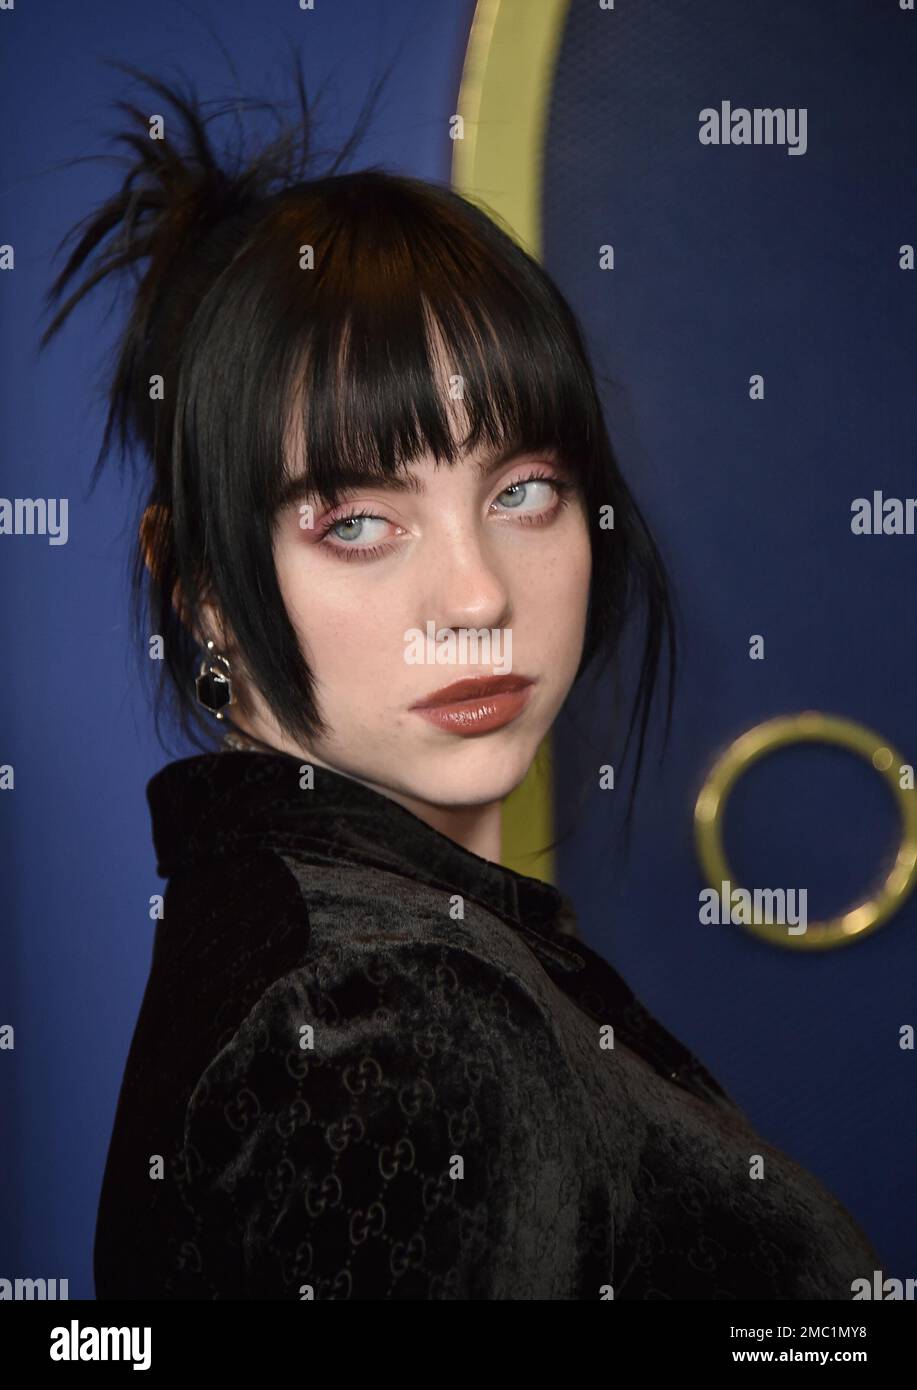 Billie Eilish arrives at the 94th Academy Awards nominees luncheon on